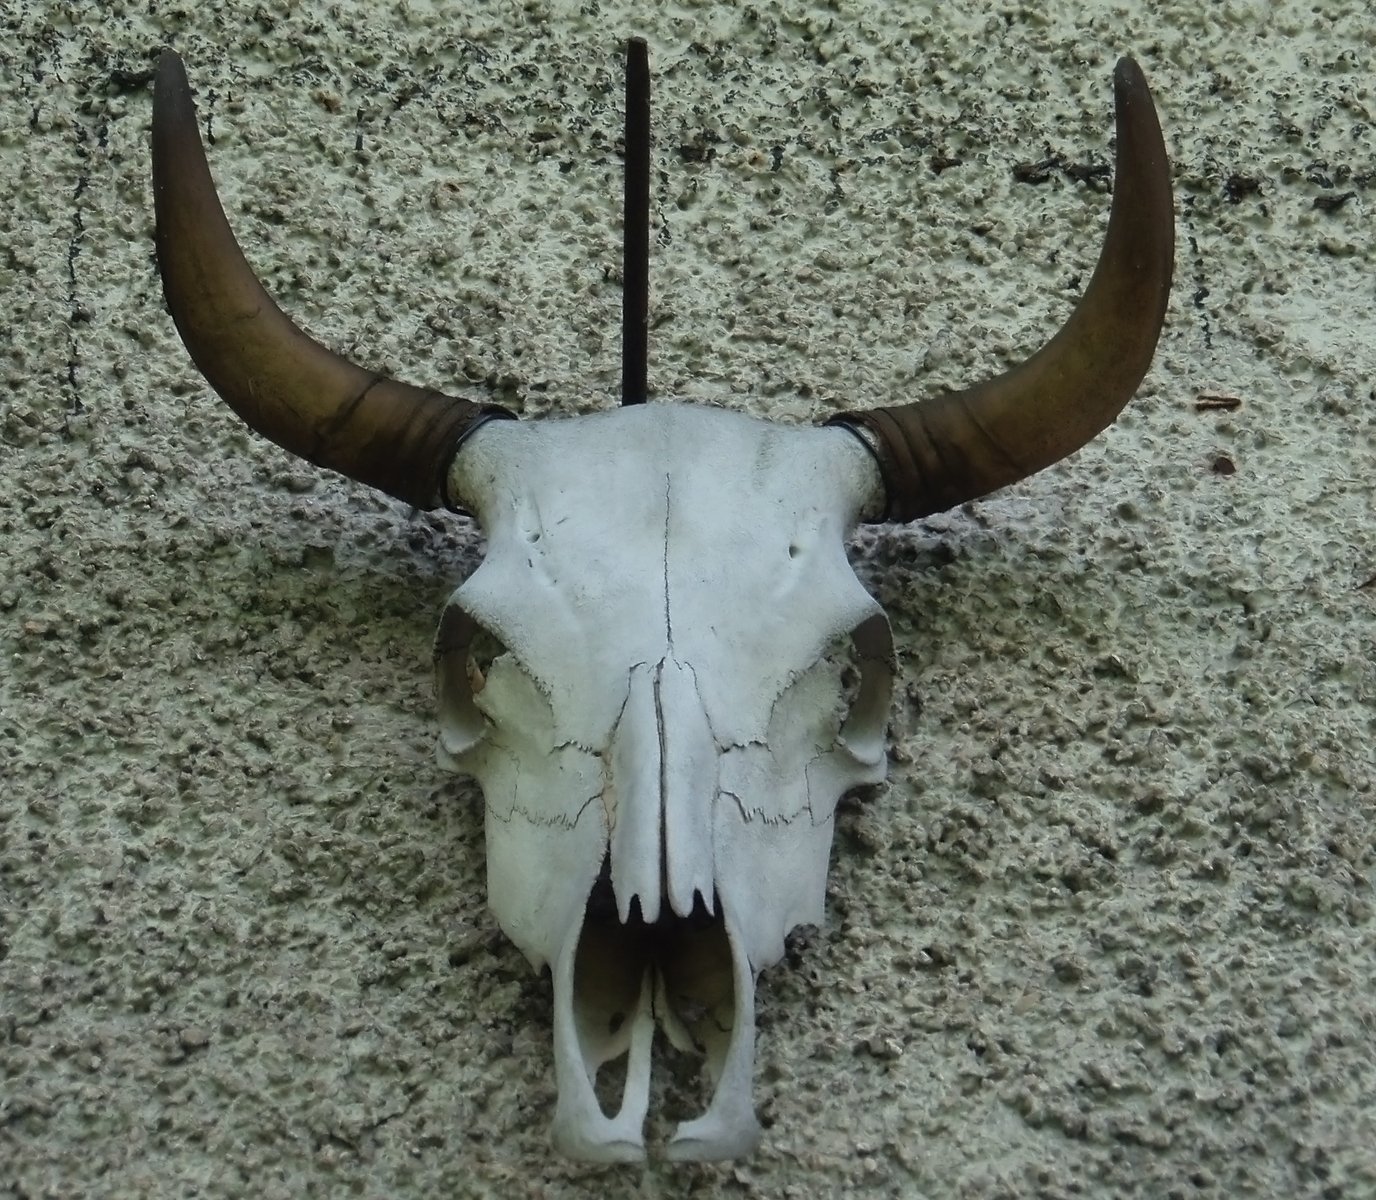 there is a bull skull with long horn horns